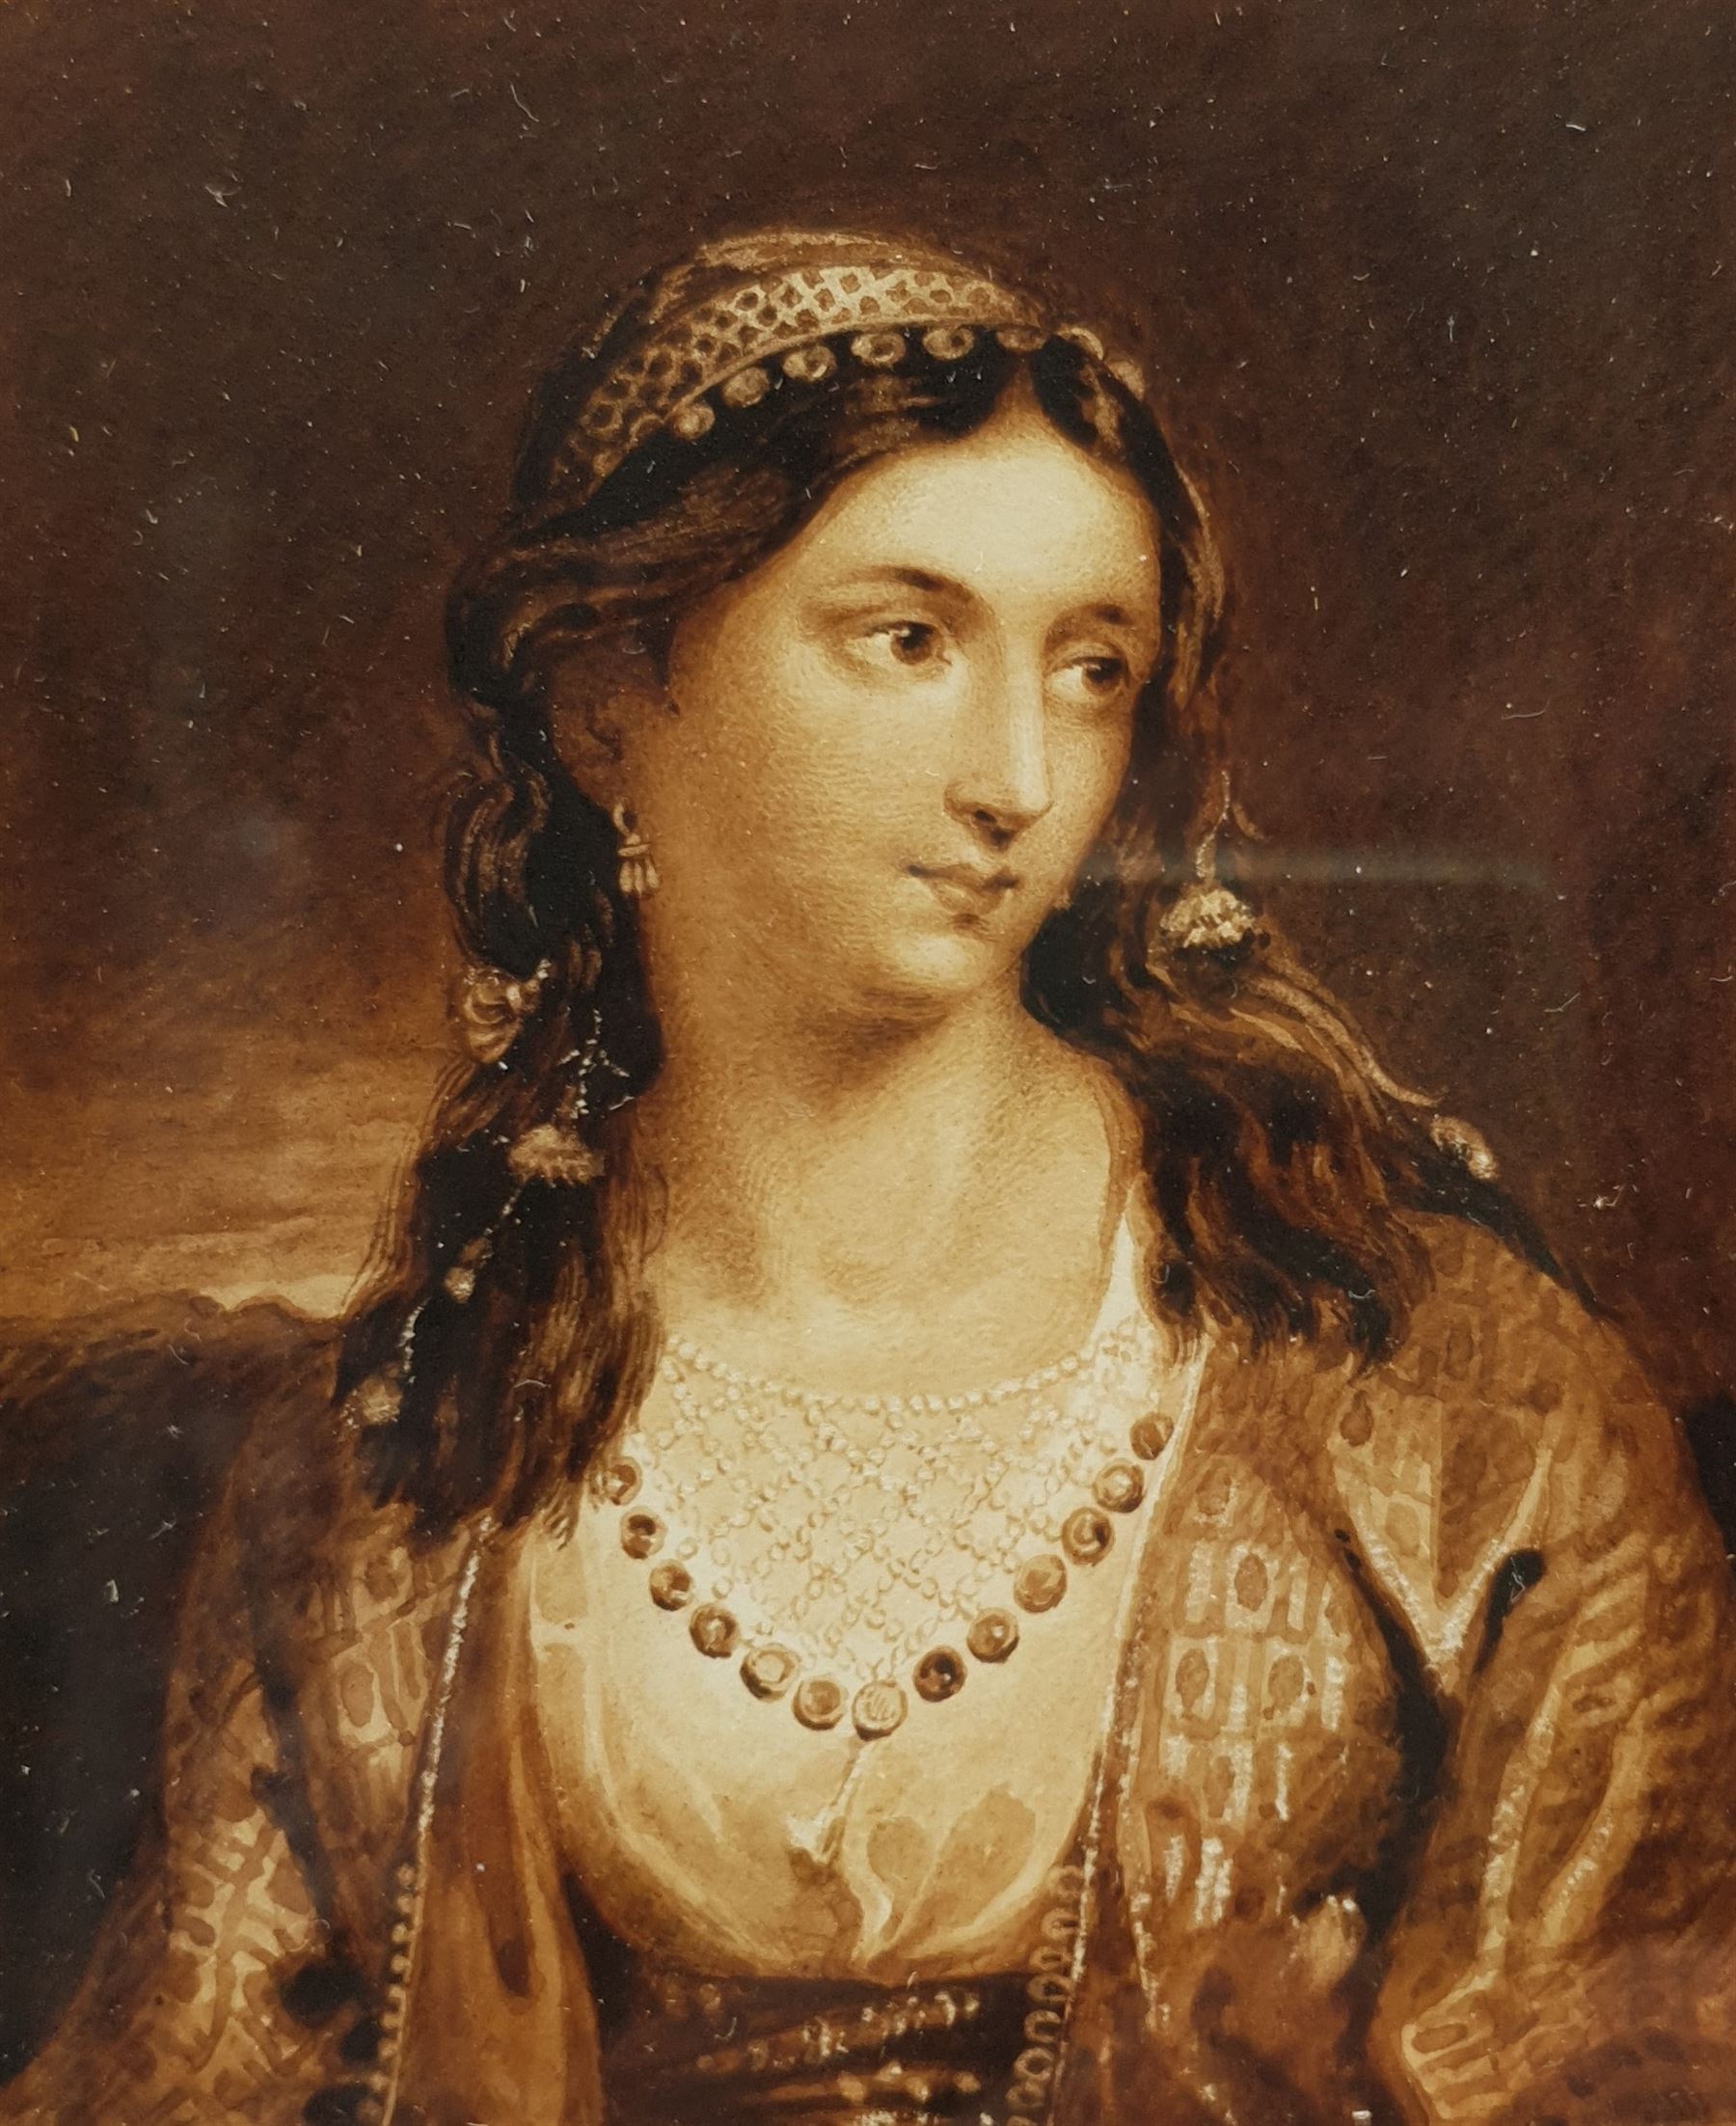 MEH (19th century): Lady with Hairband